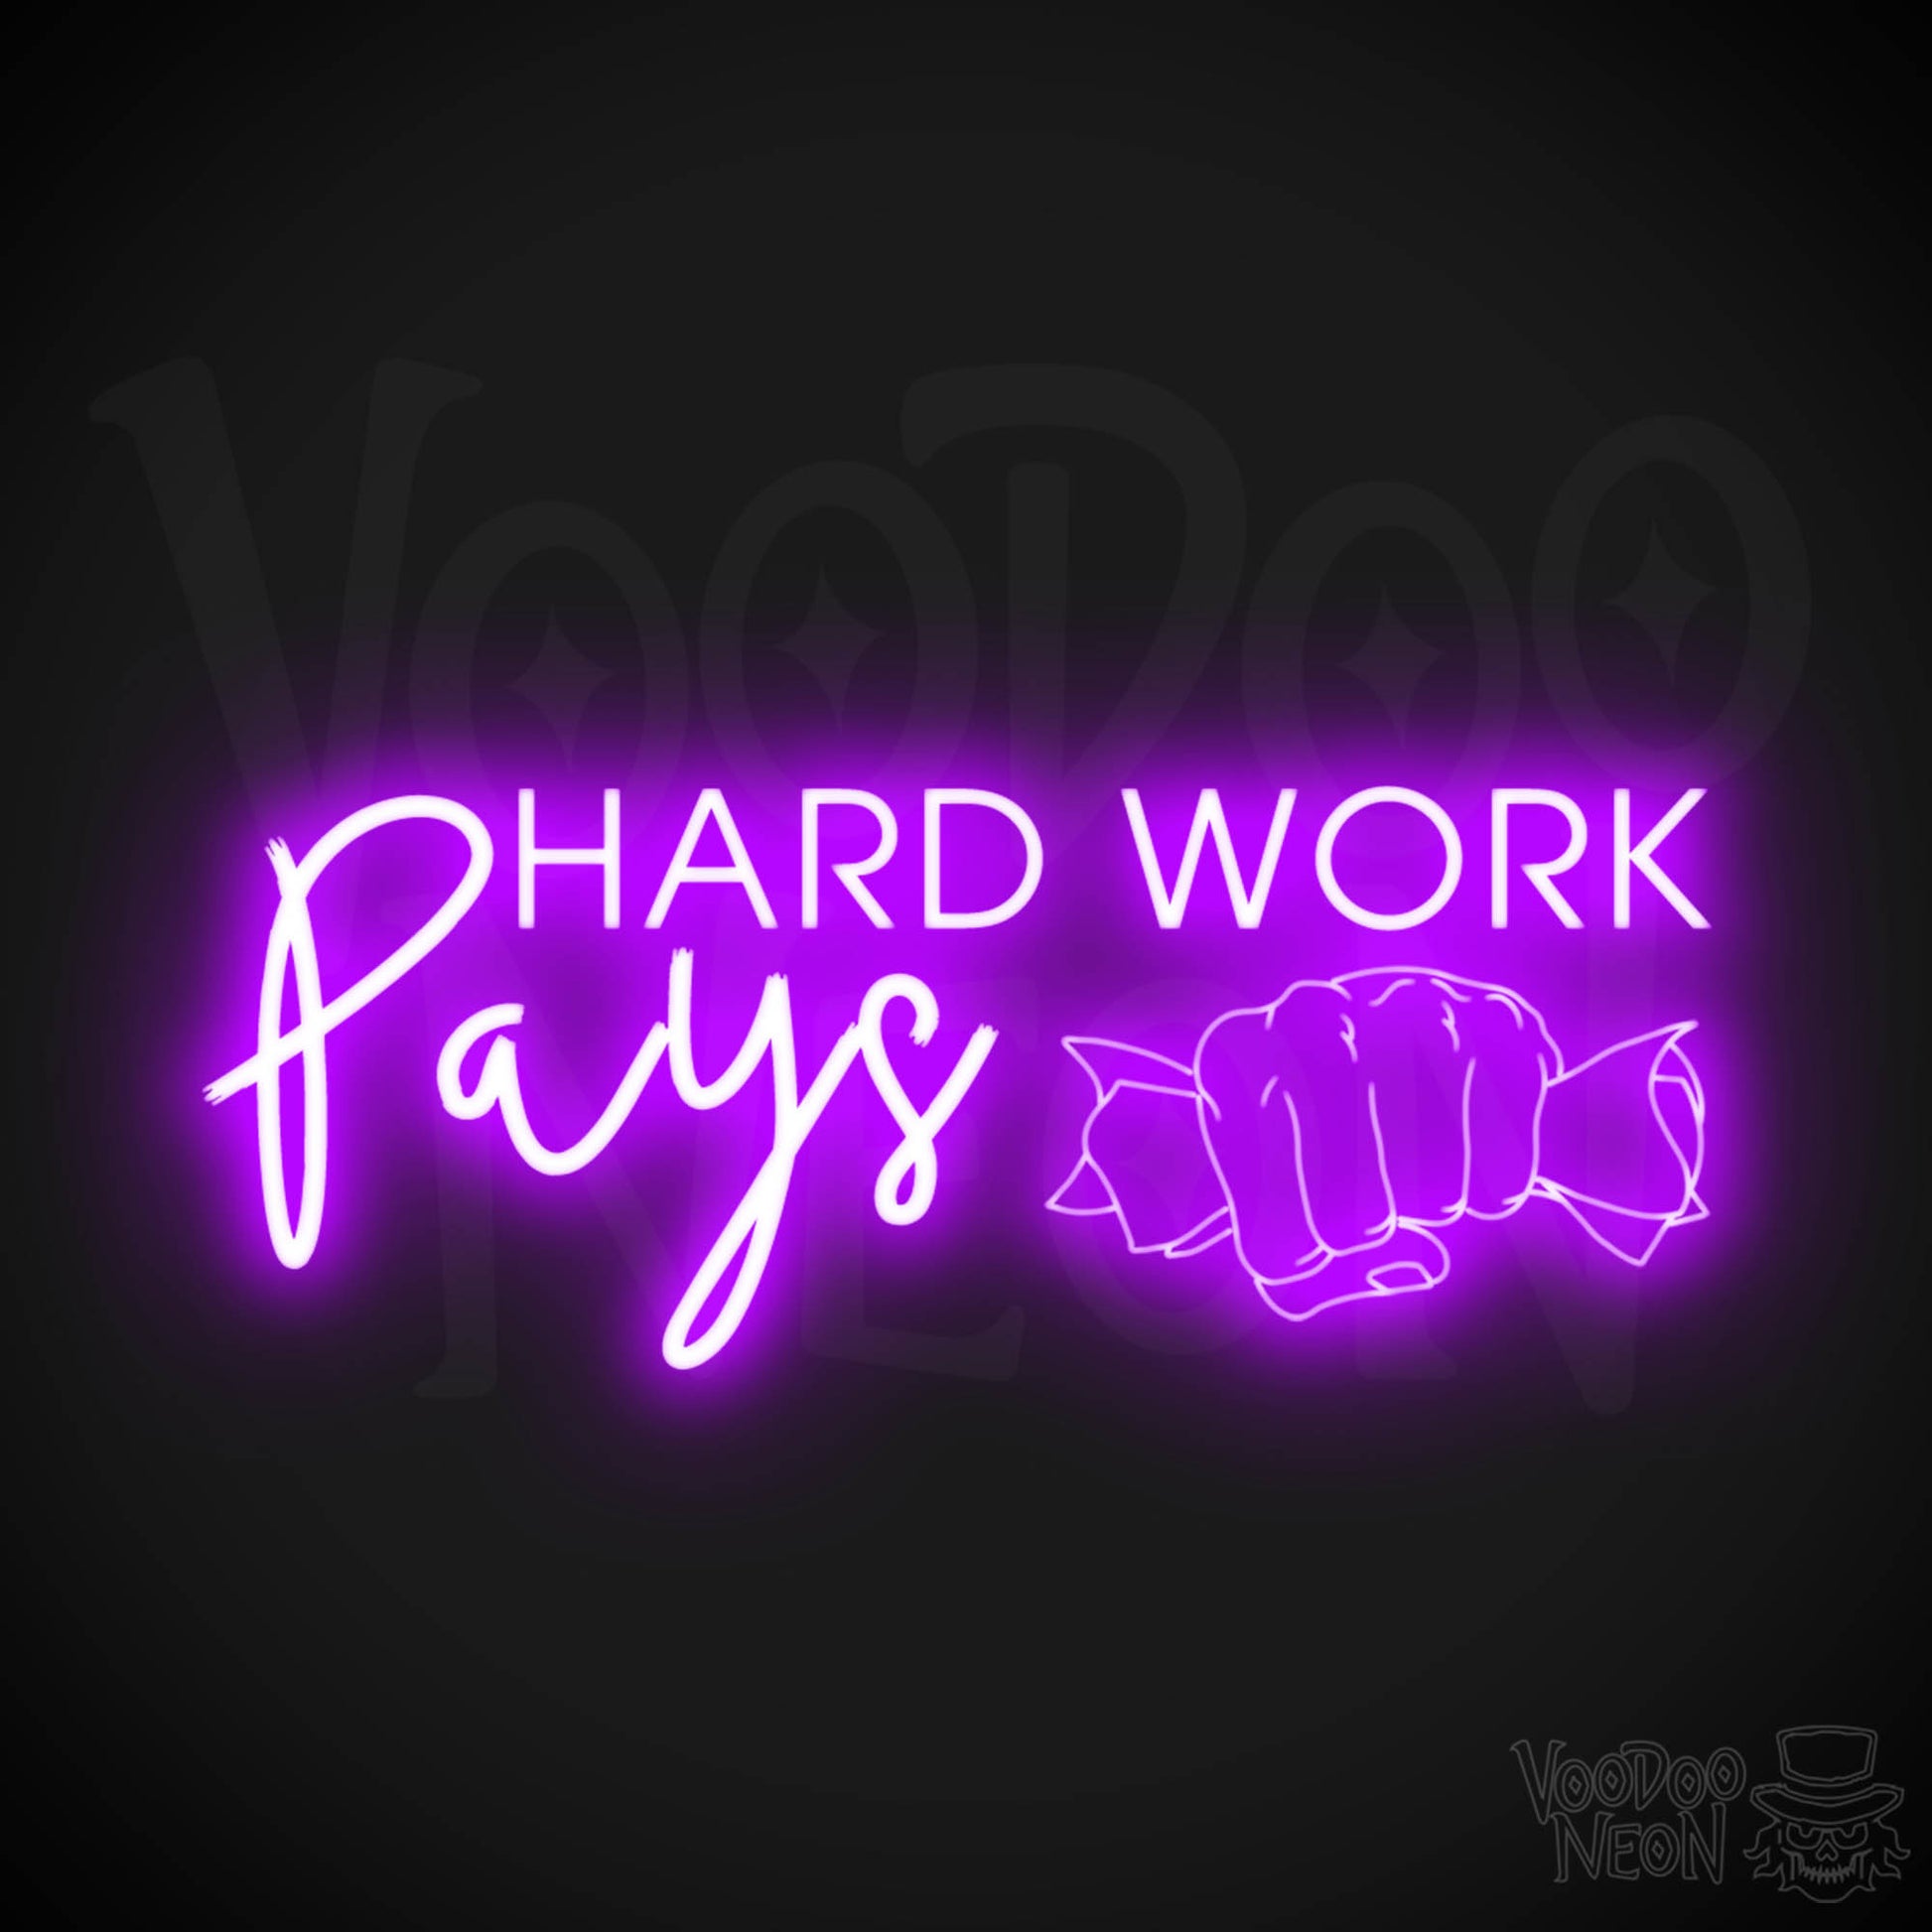 Hard Work Pays Neon Sign - LED Neon Wall Art - Color Purple